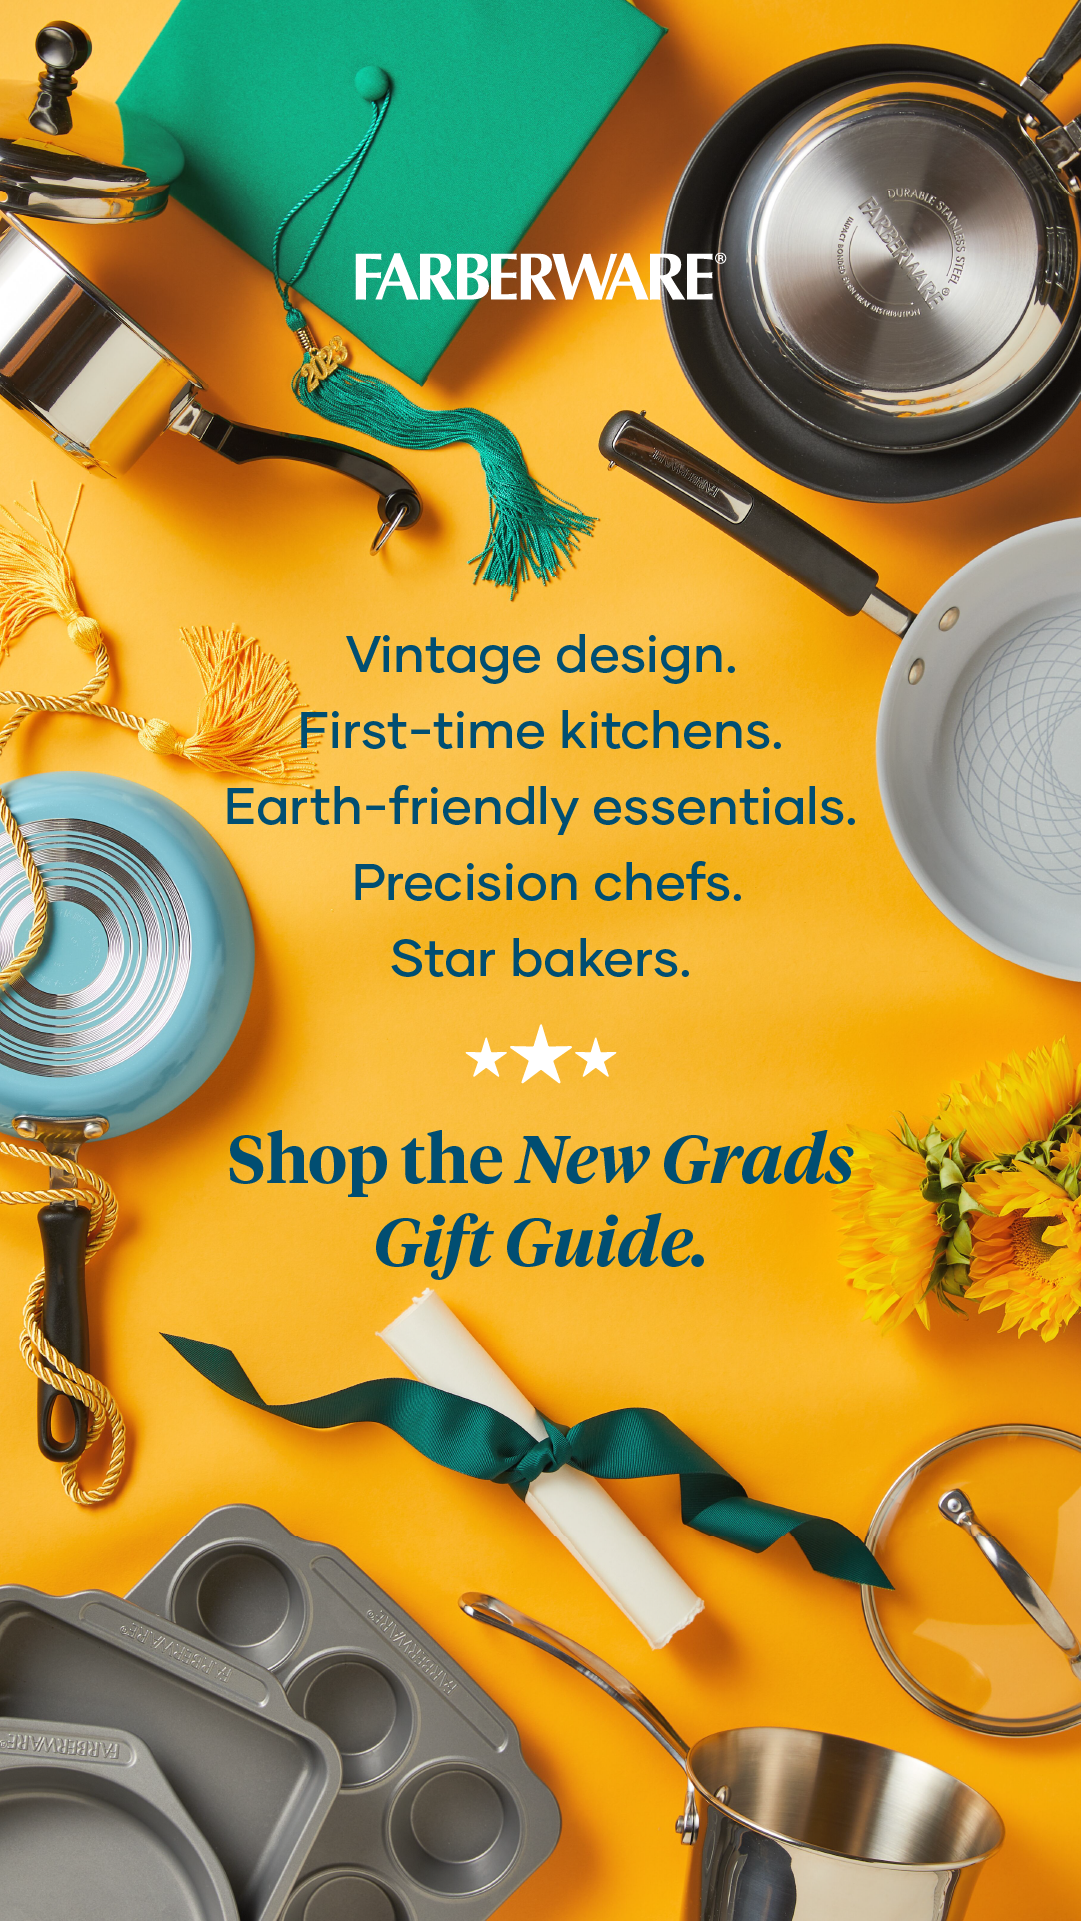 Grad Gift Guide 1080 x 1920 (1).png